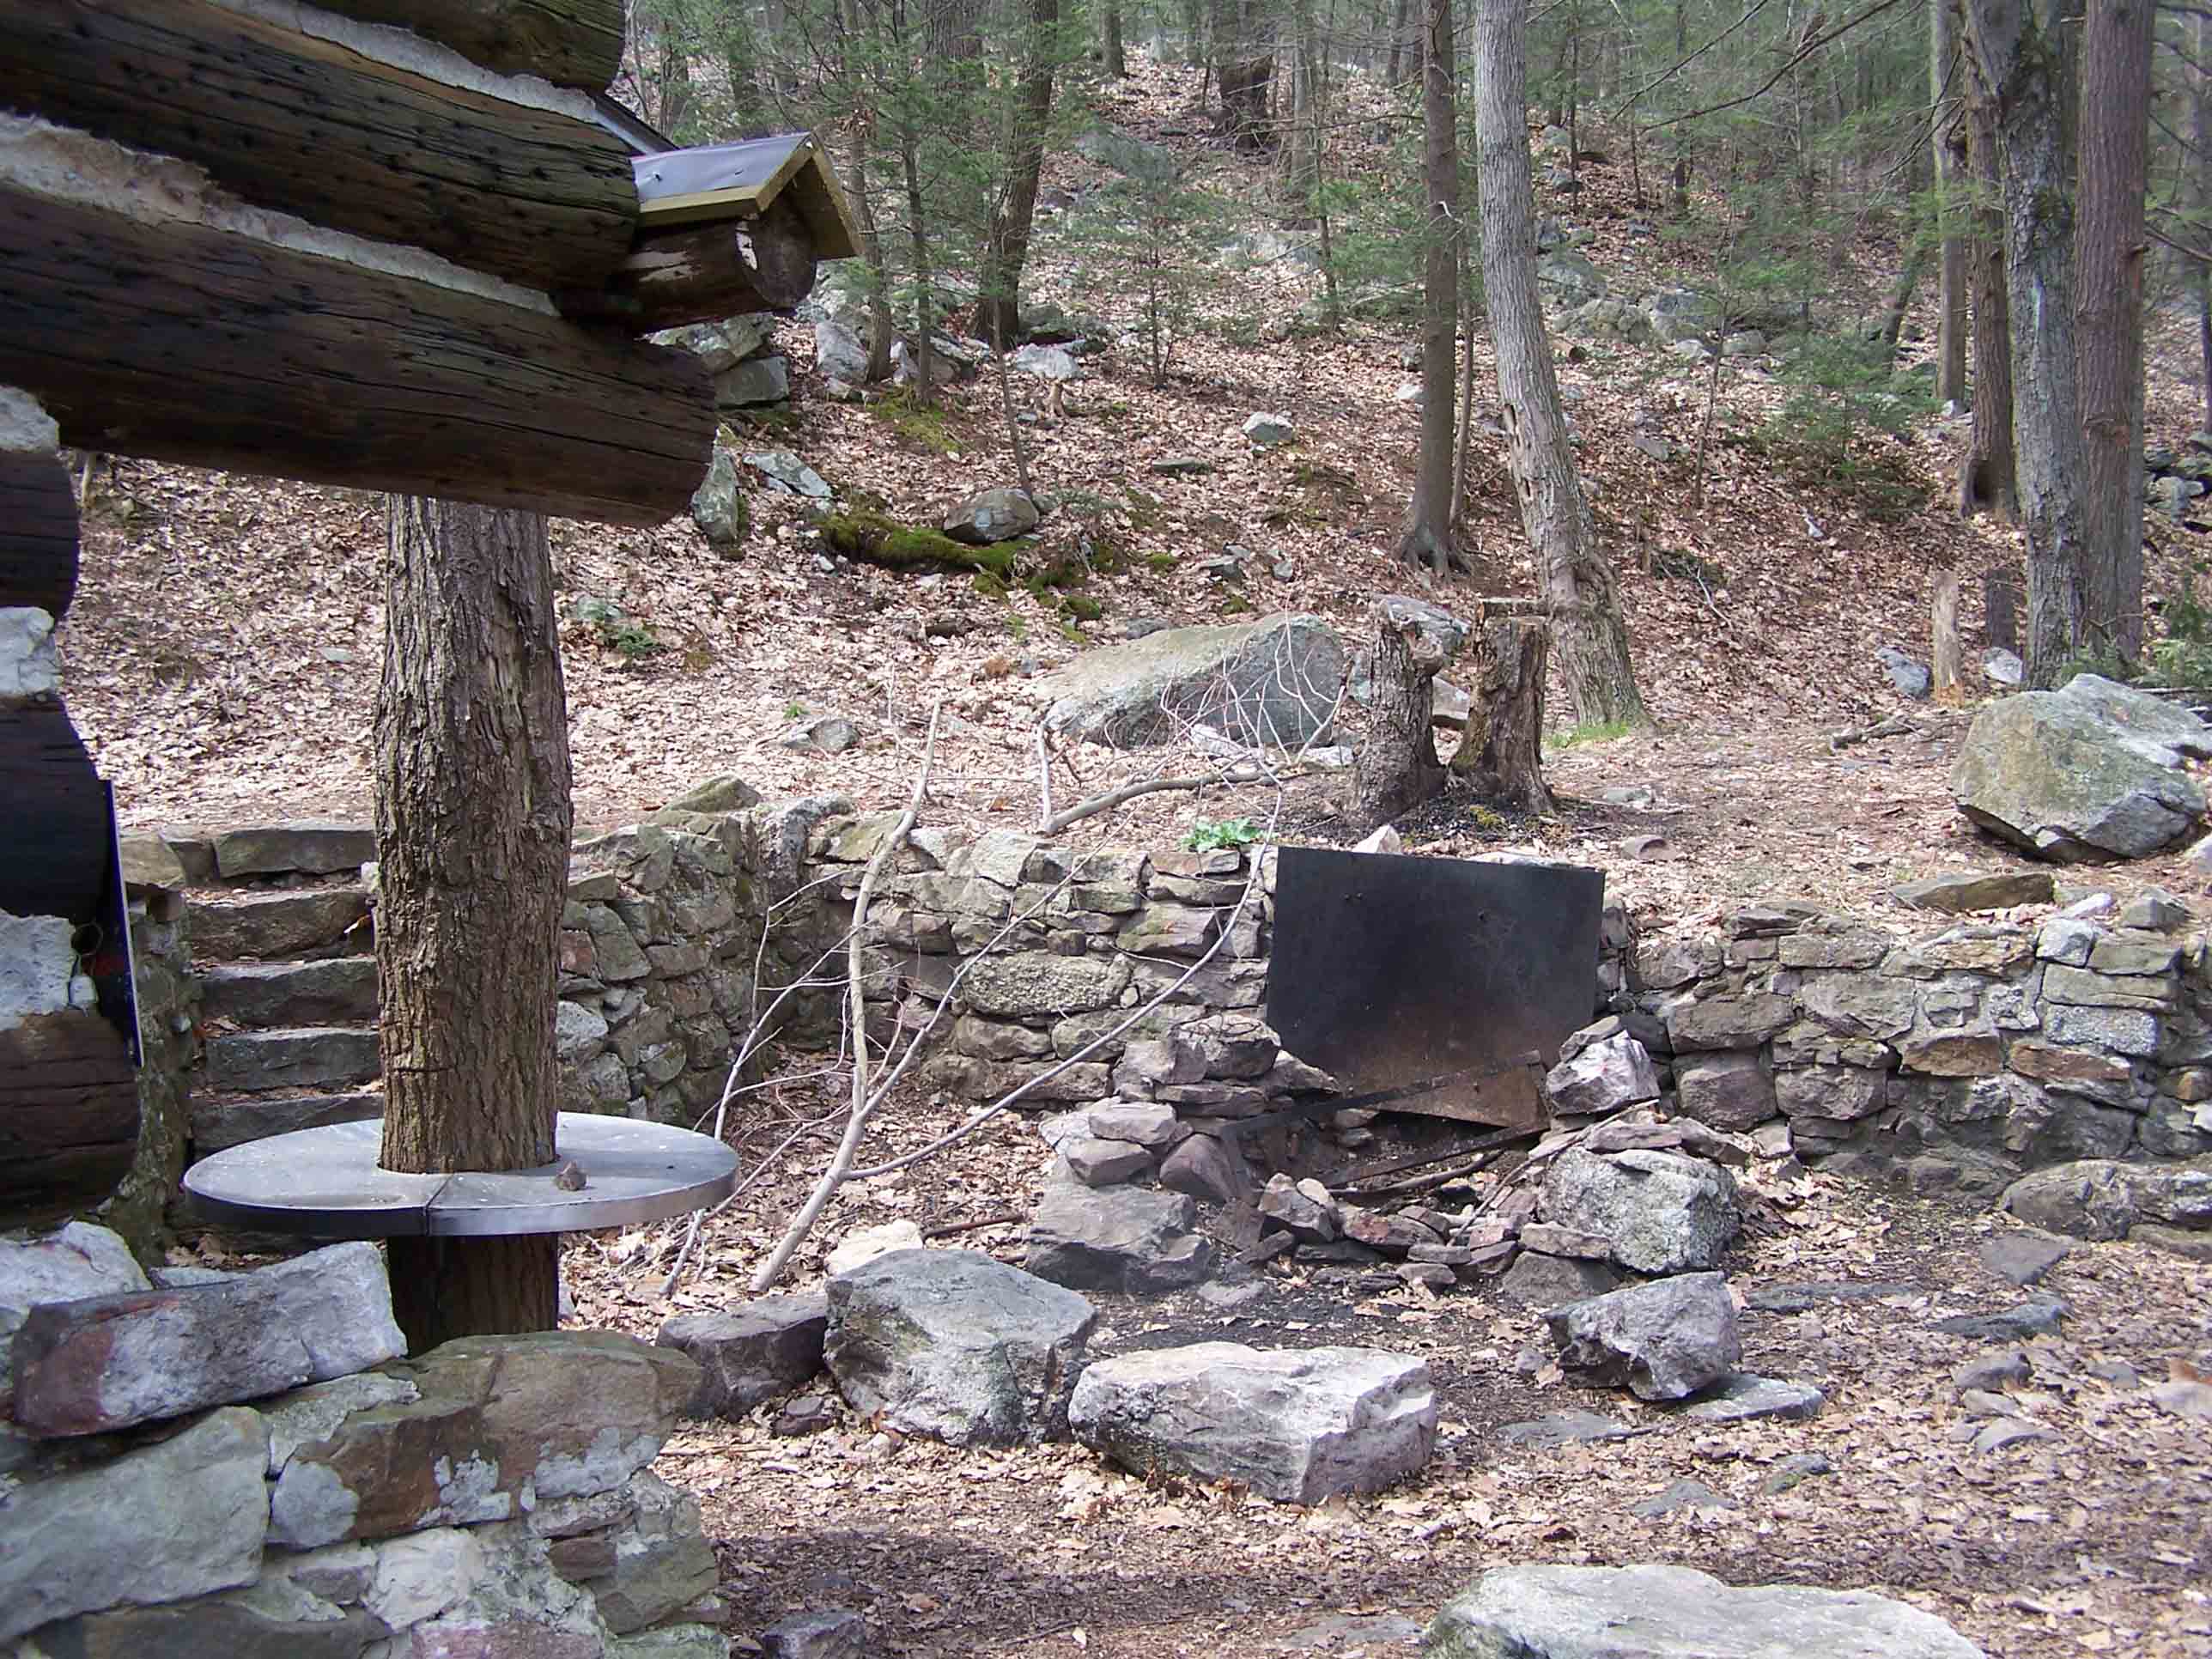 mm 6.1 - Rausch Gap Shelter. Courtesy at@rohland.org